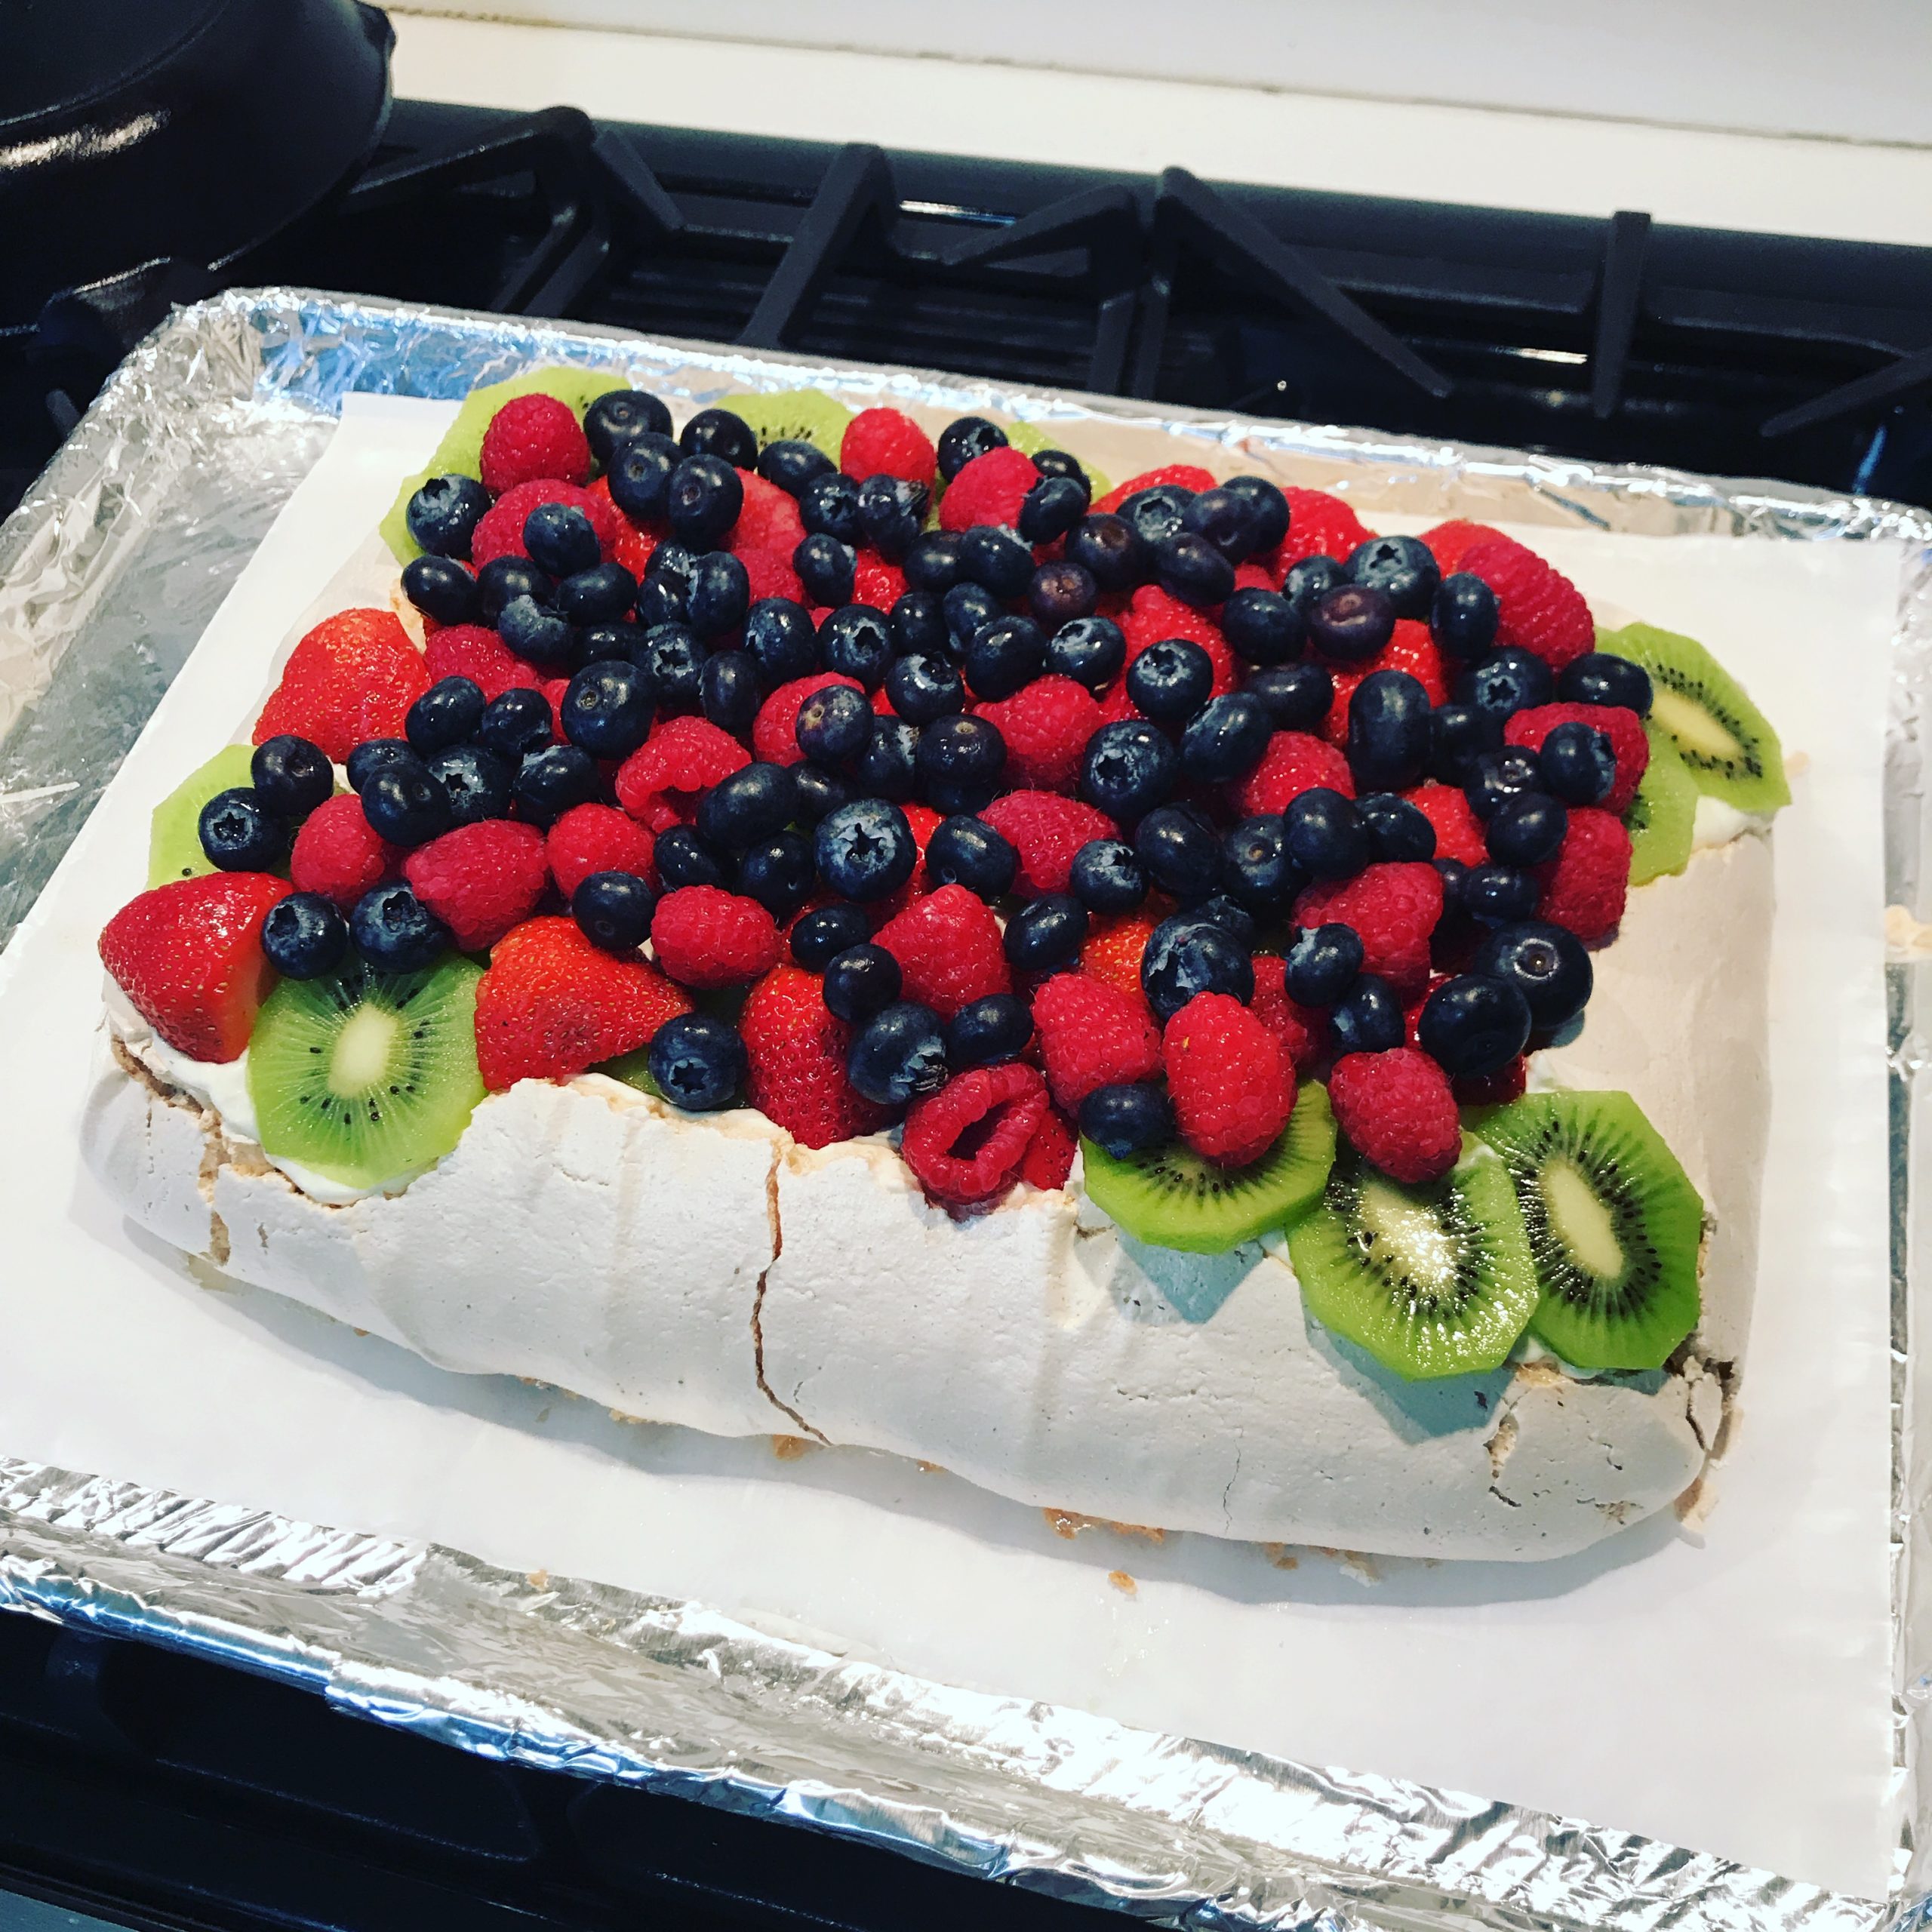 Pavalova covered in Raspberries and blueberries with kiwi on the side